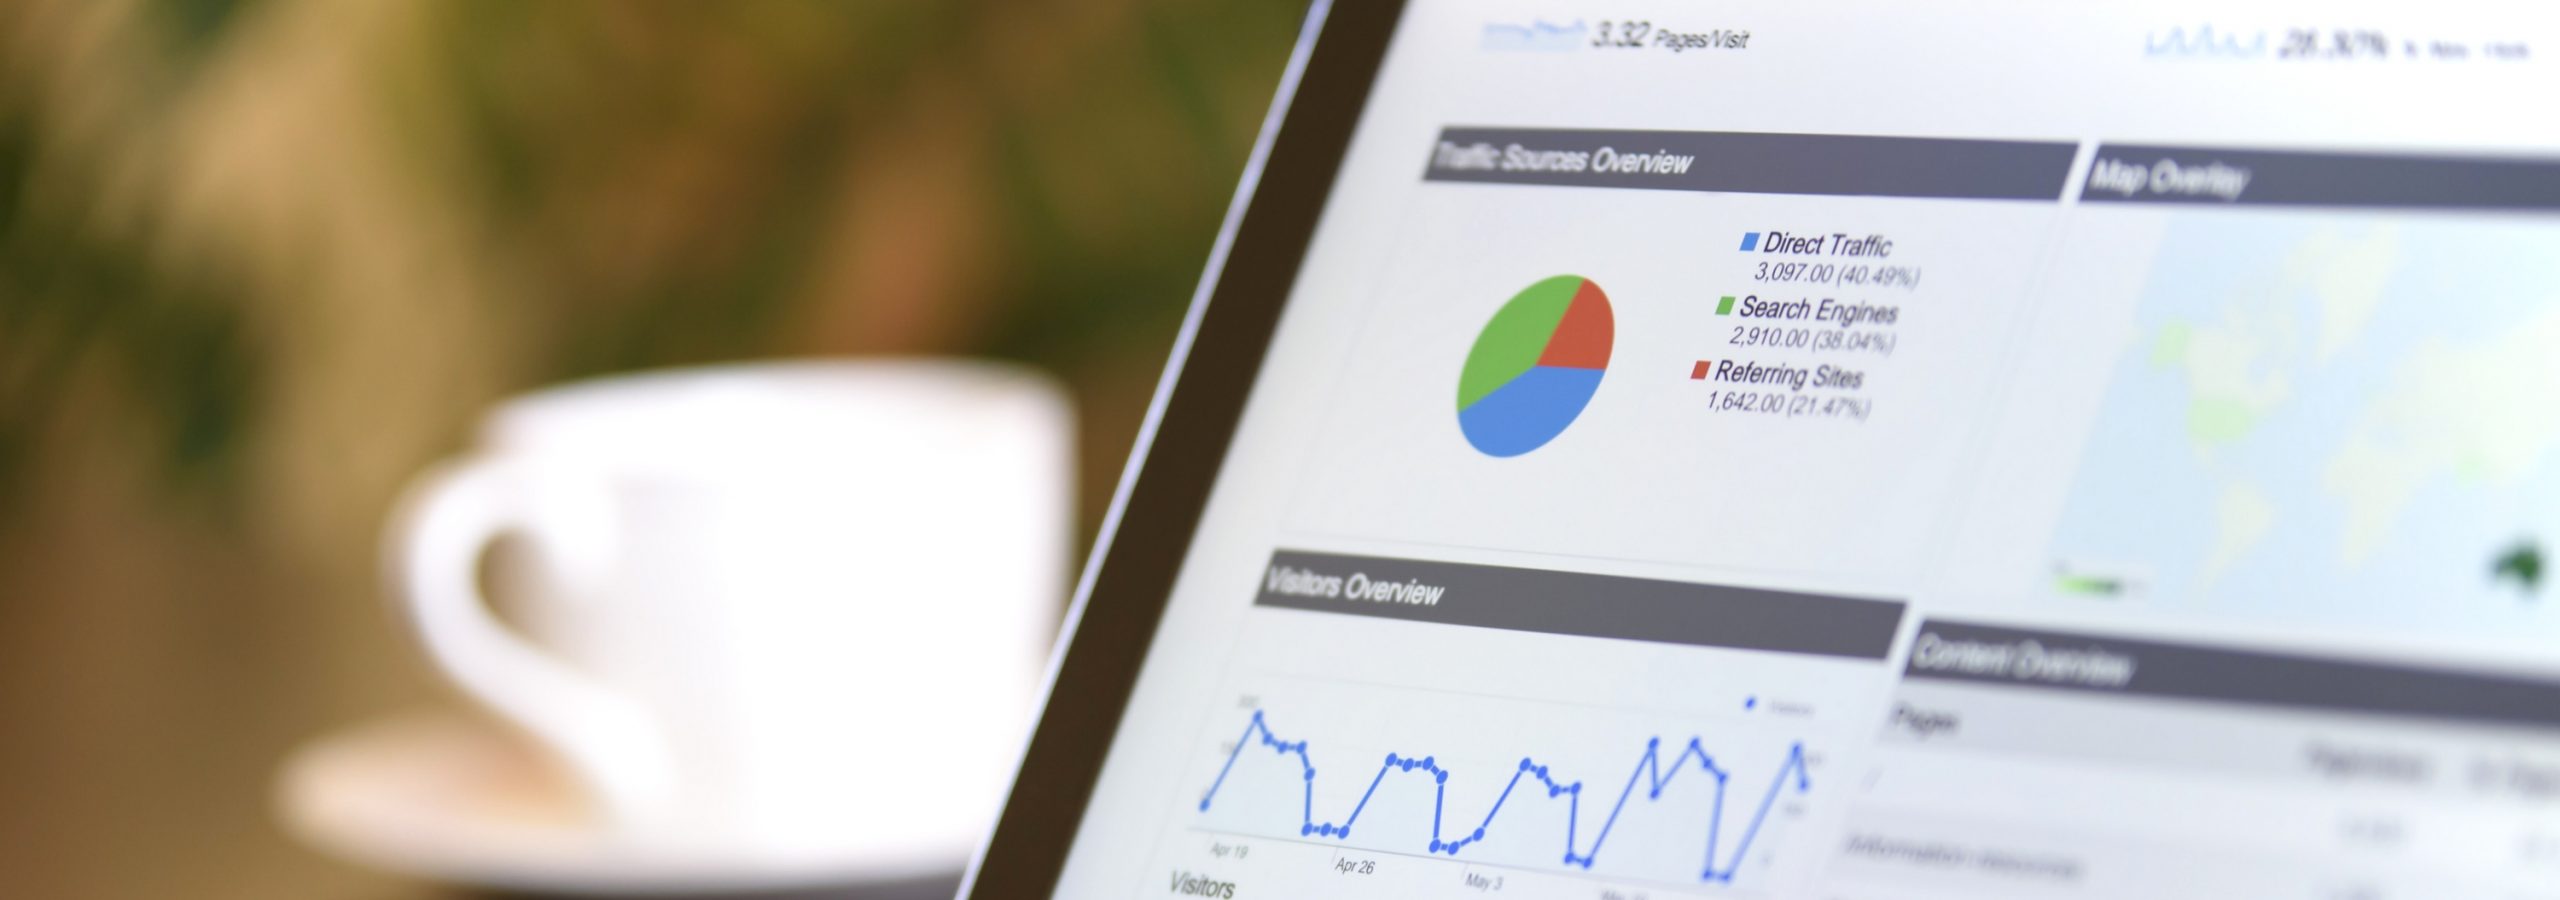 Top Five Marketing Analytics You Should Be Tracking